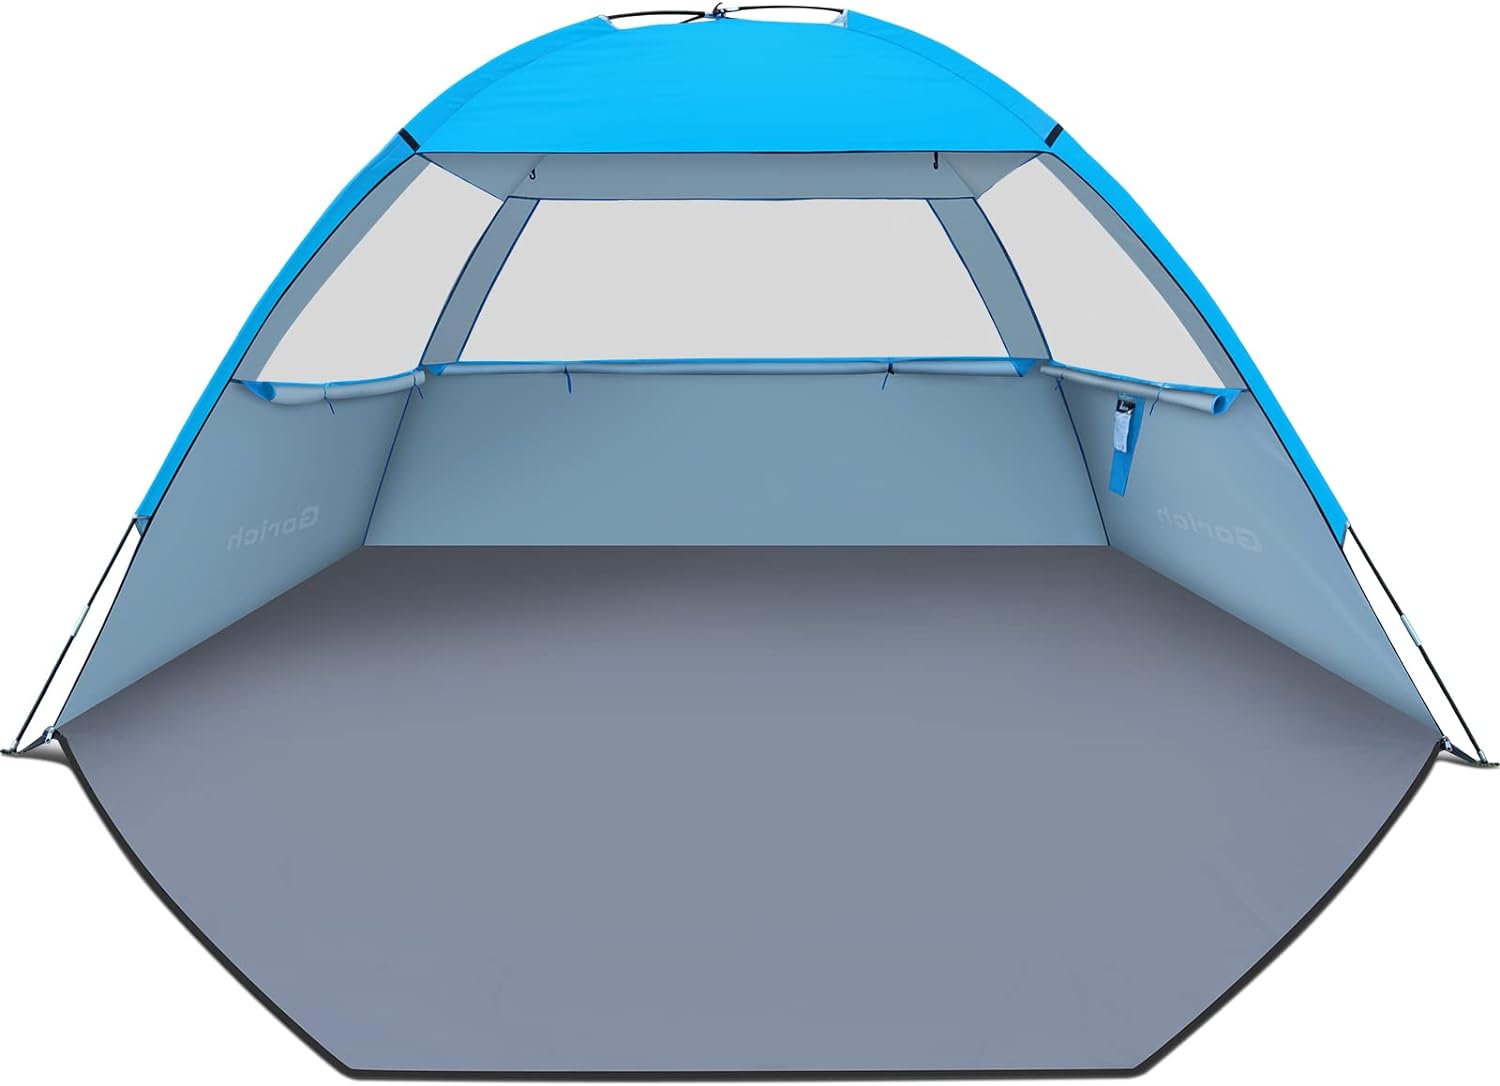 Gorich Beach Tent Review - Your Ultimate Outdoor Comfort Solution